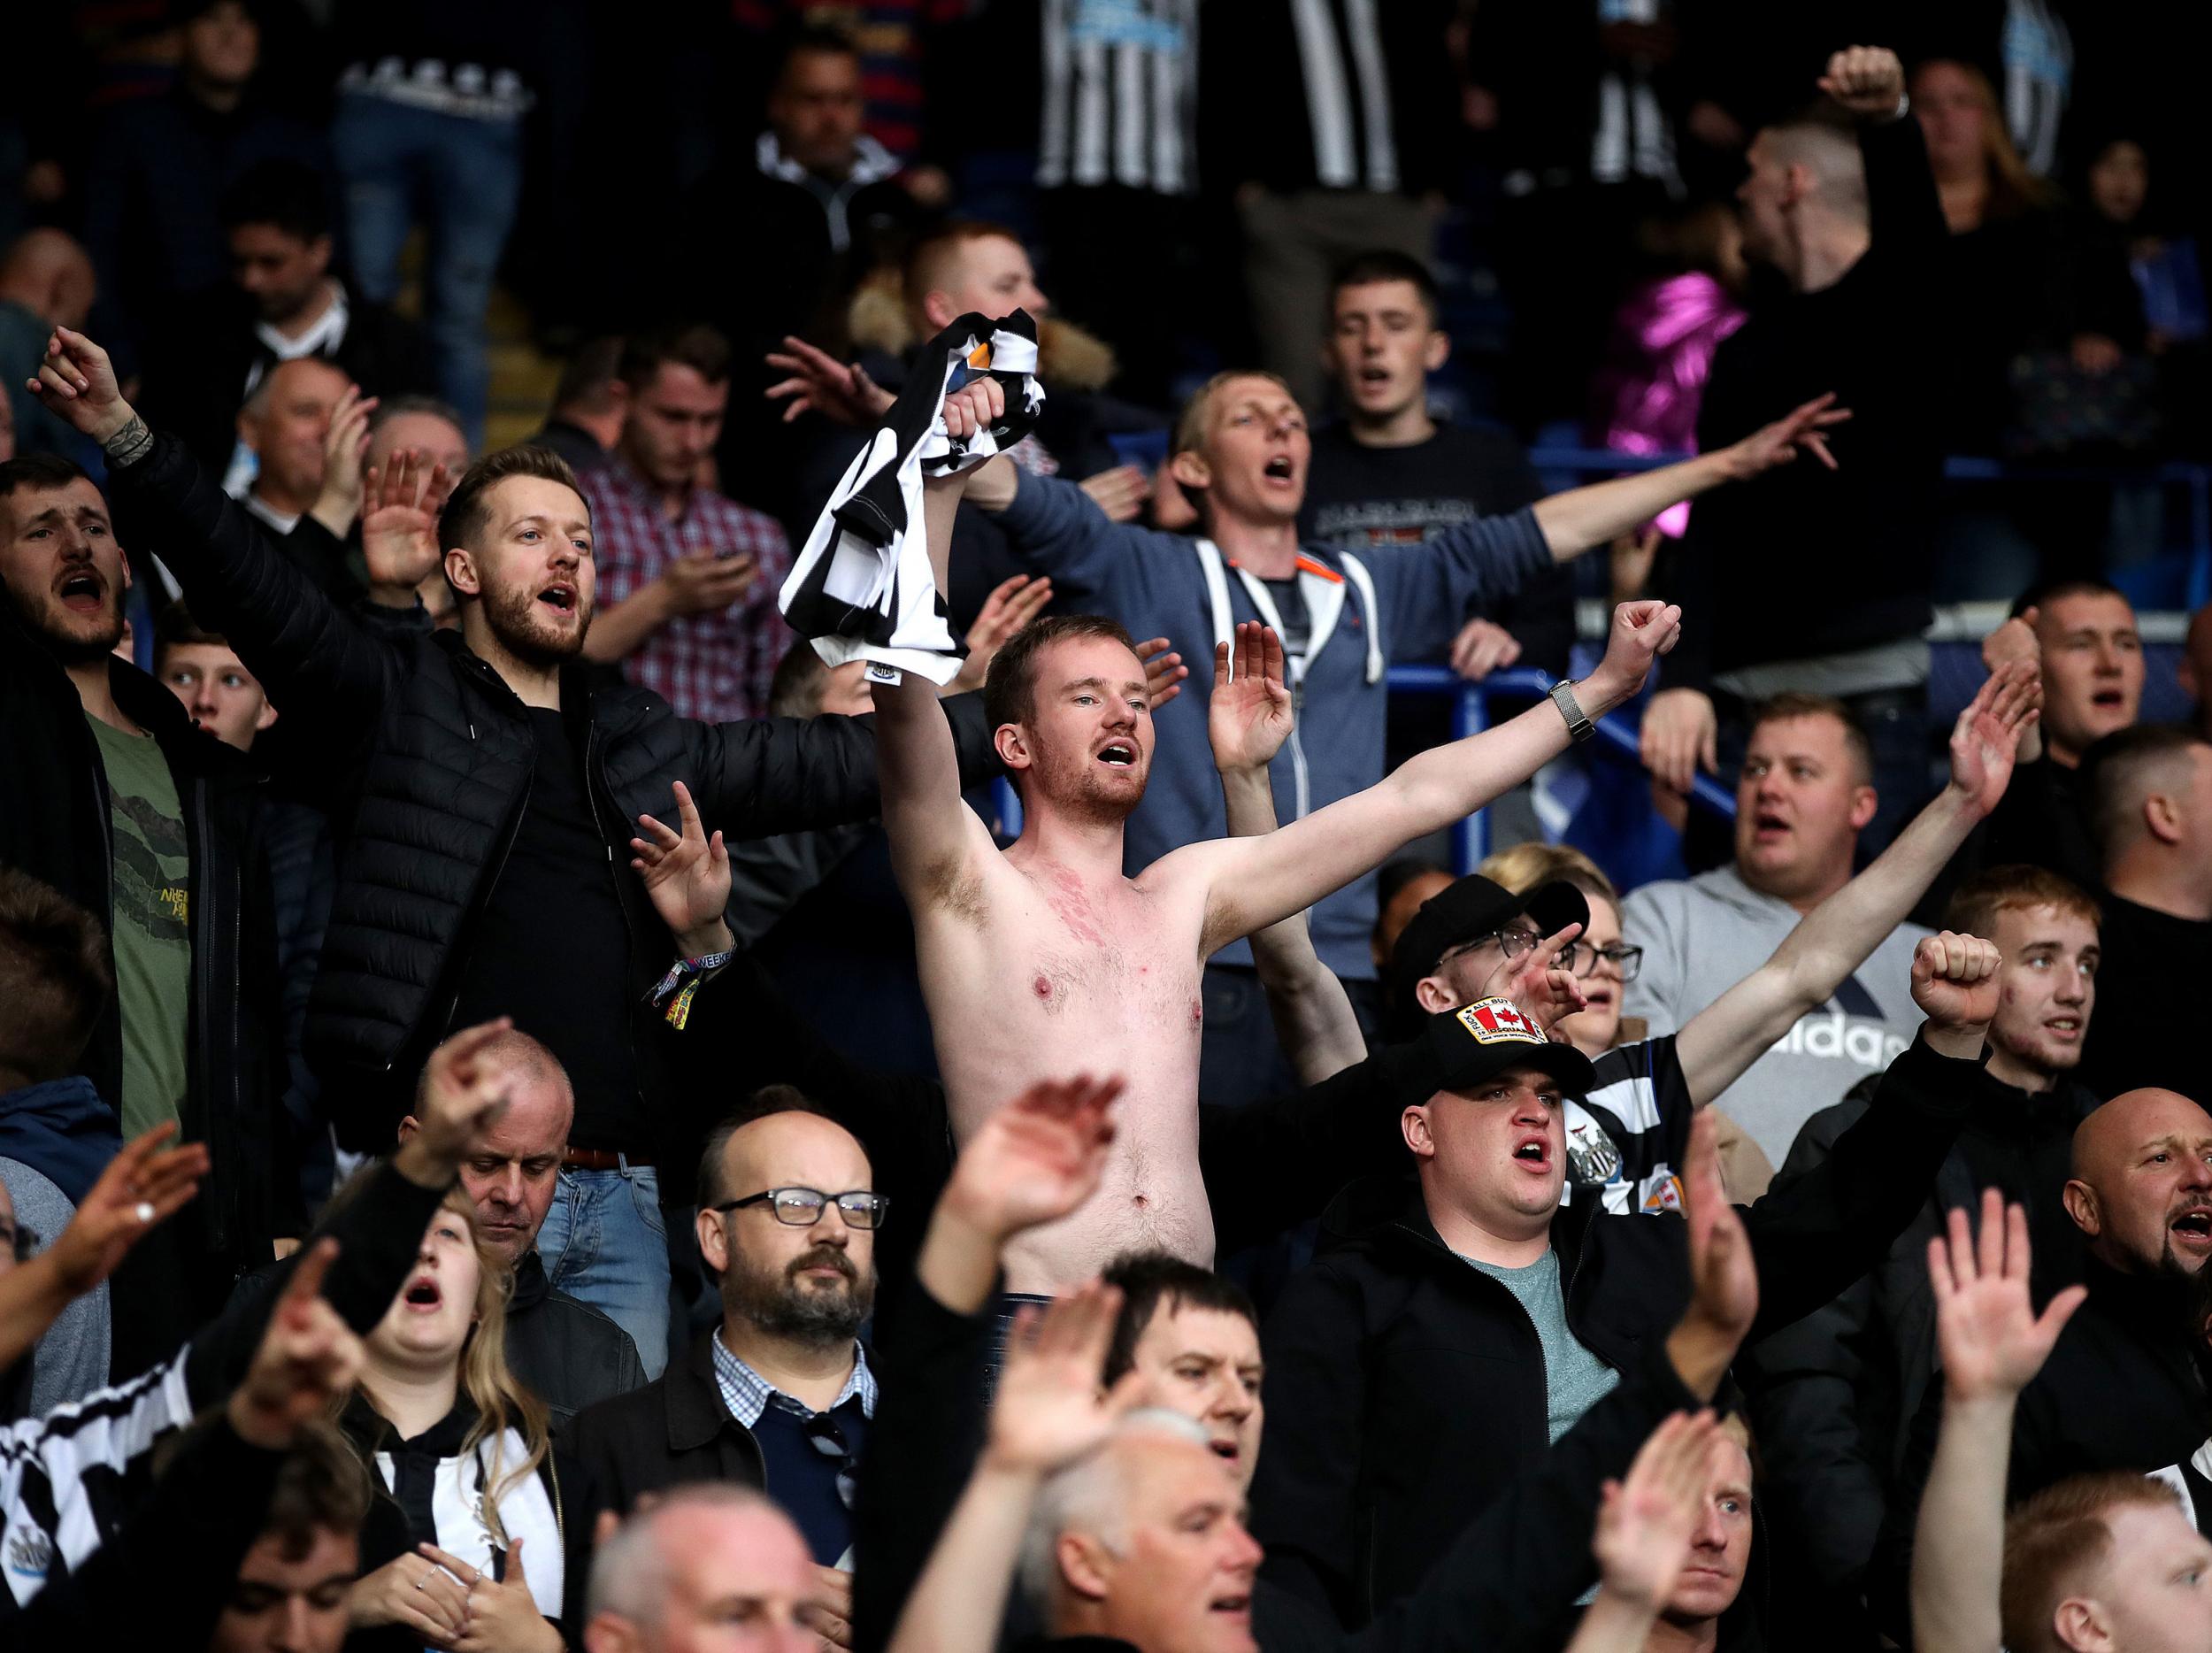 Newcastle's brilliant fans did not stop singing